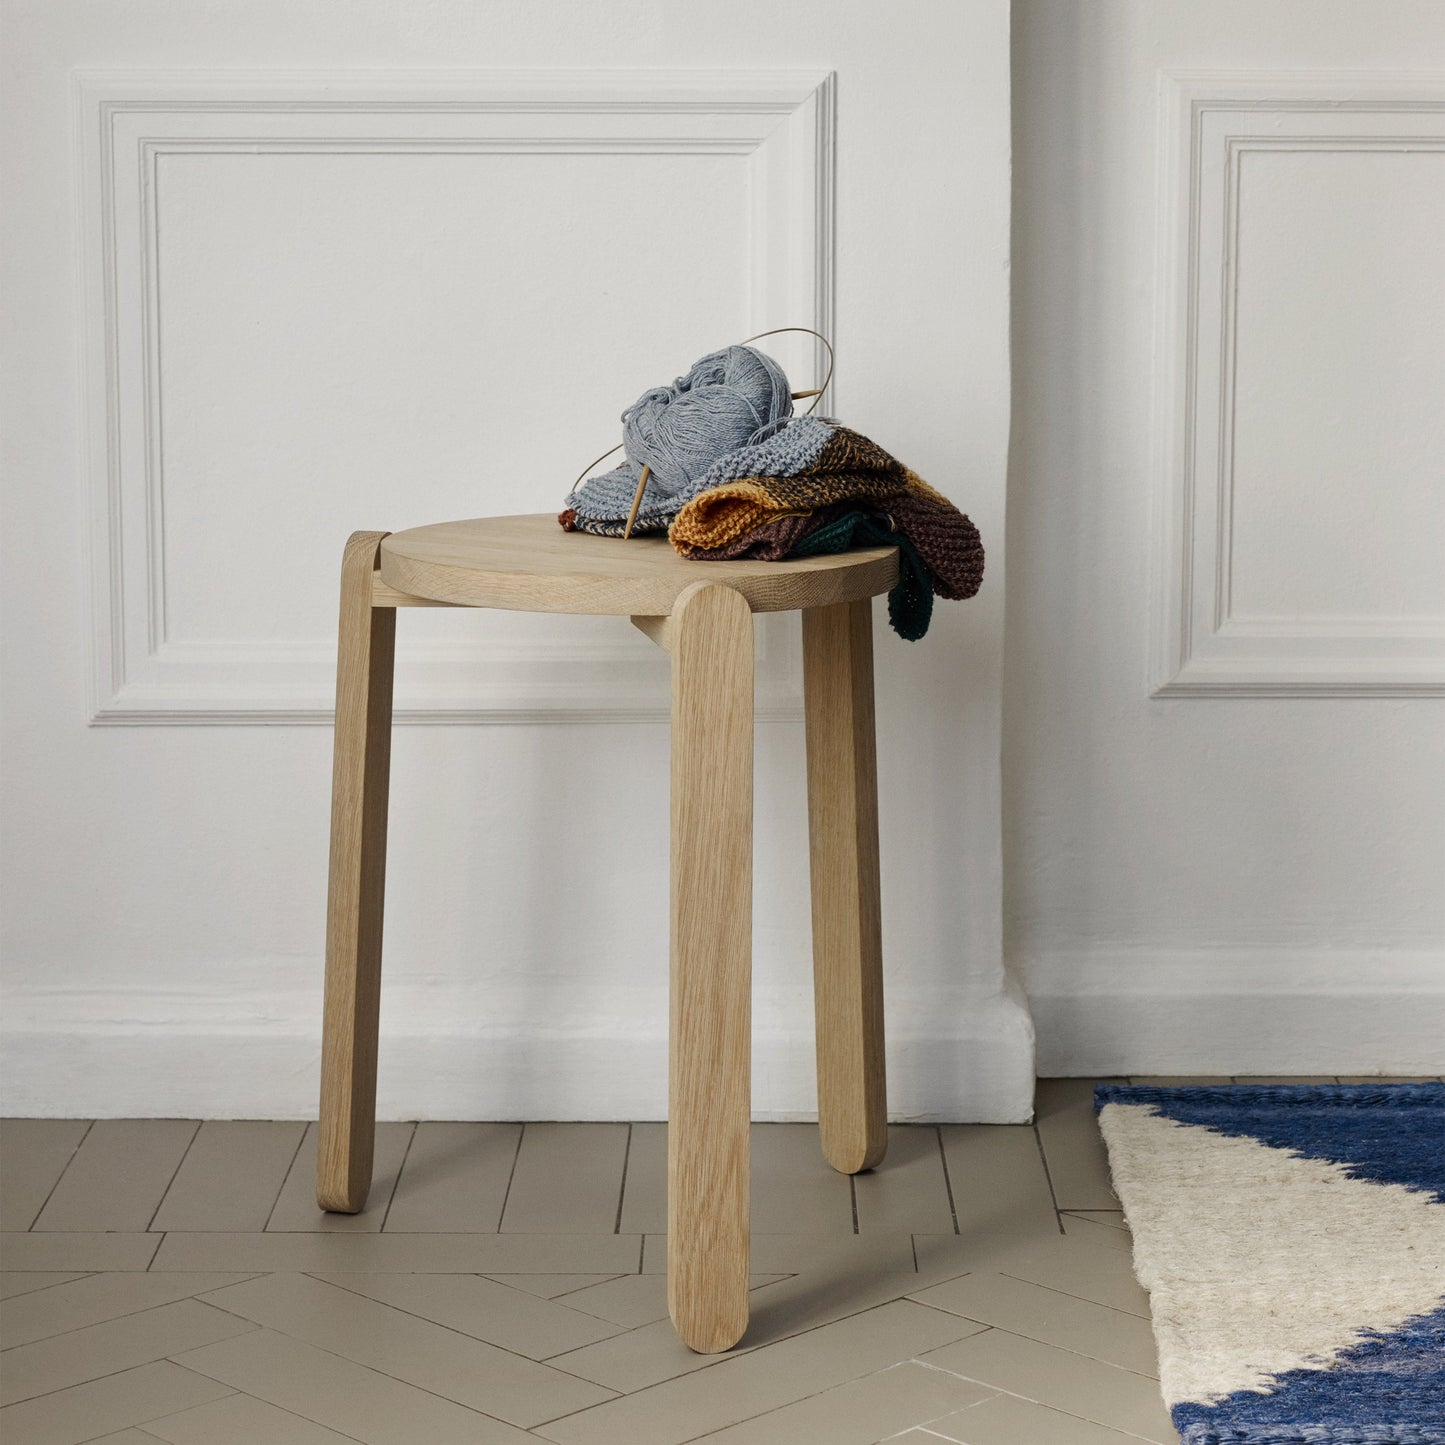 Nomad Stackable Stool